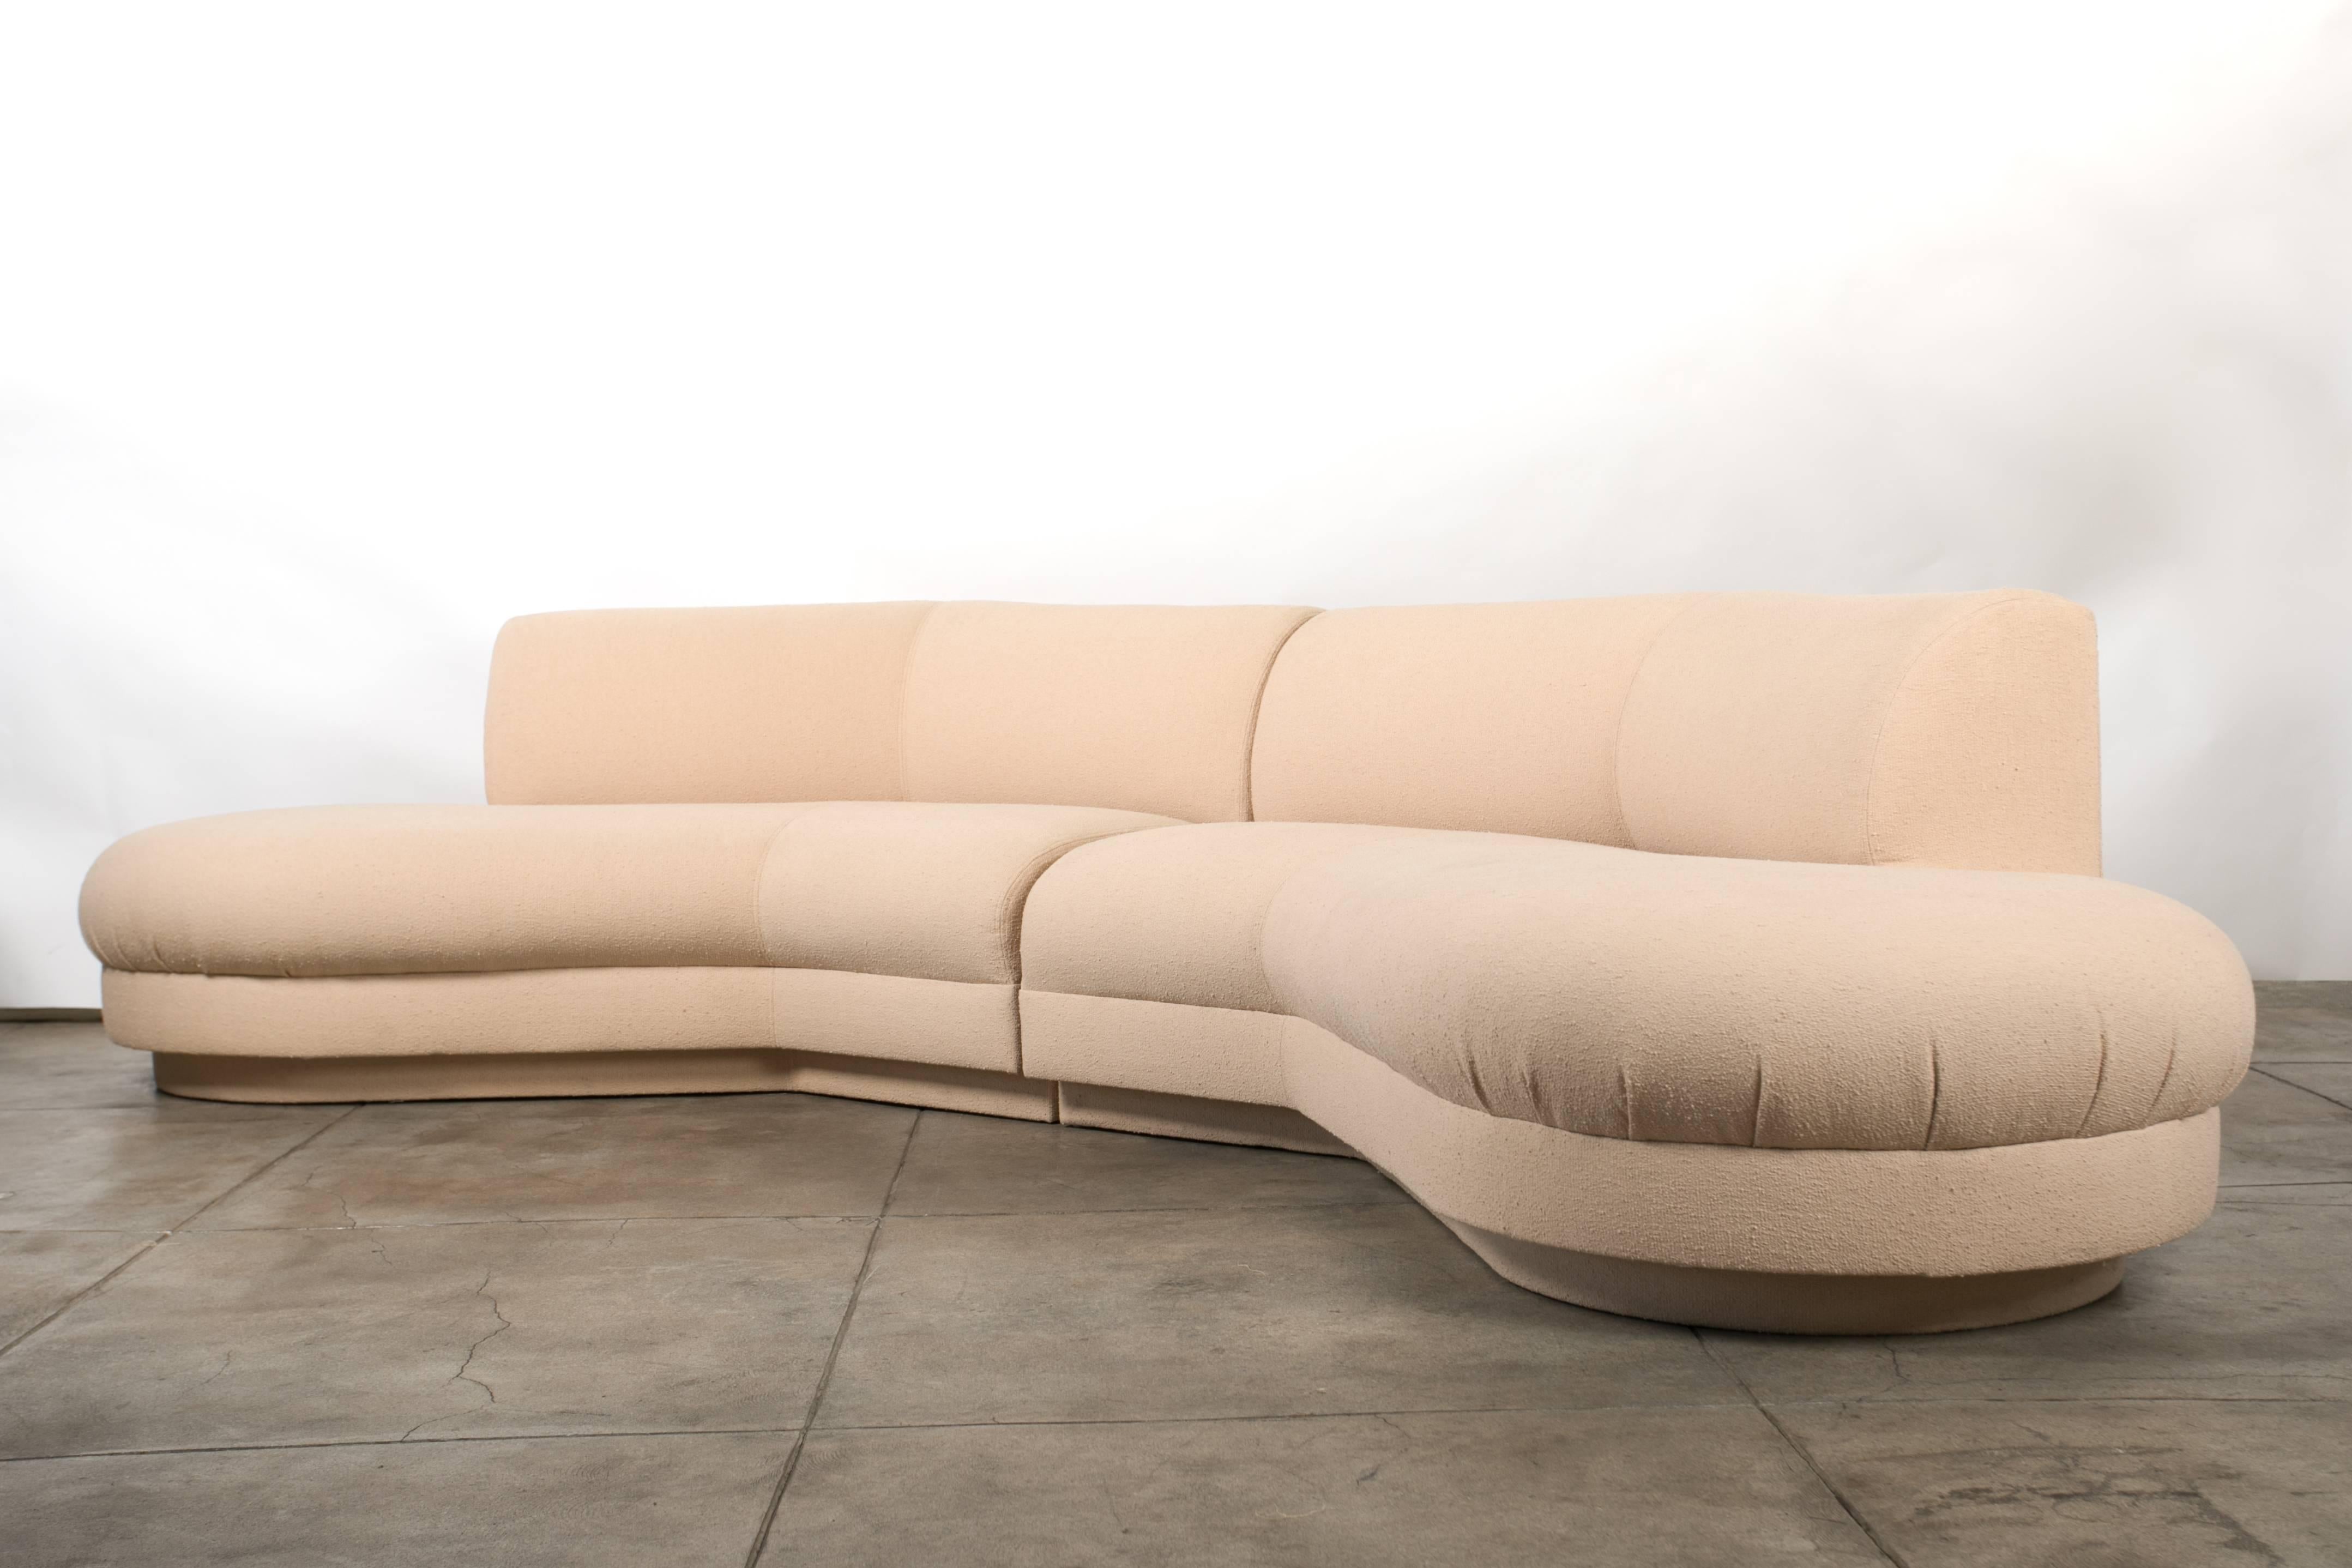 A two-piece Vladimir Kagan-designed curved sectional for Directional, reupholstered in a caramel-colored bouclé. The two interlocking sections have a rounded backrest and open sides, with segmented top-stitched upholstery emphasizing the interior